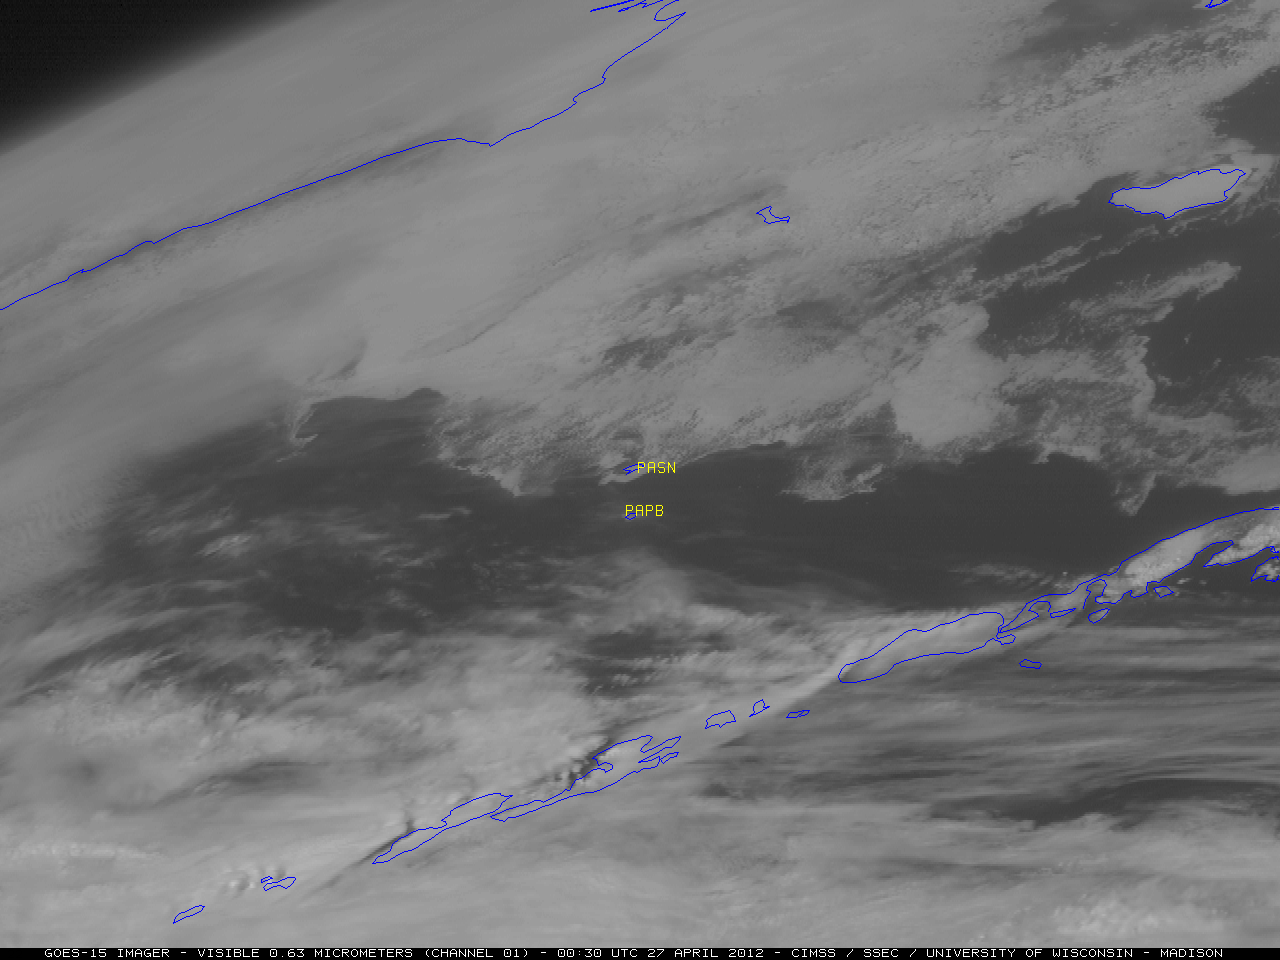 GOES-15 0.63 Âµm visible channel images (click image to play animation)